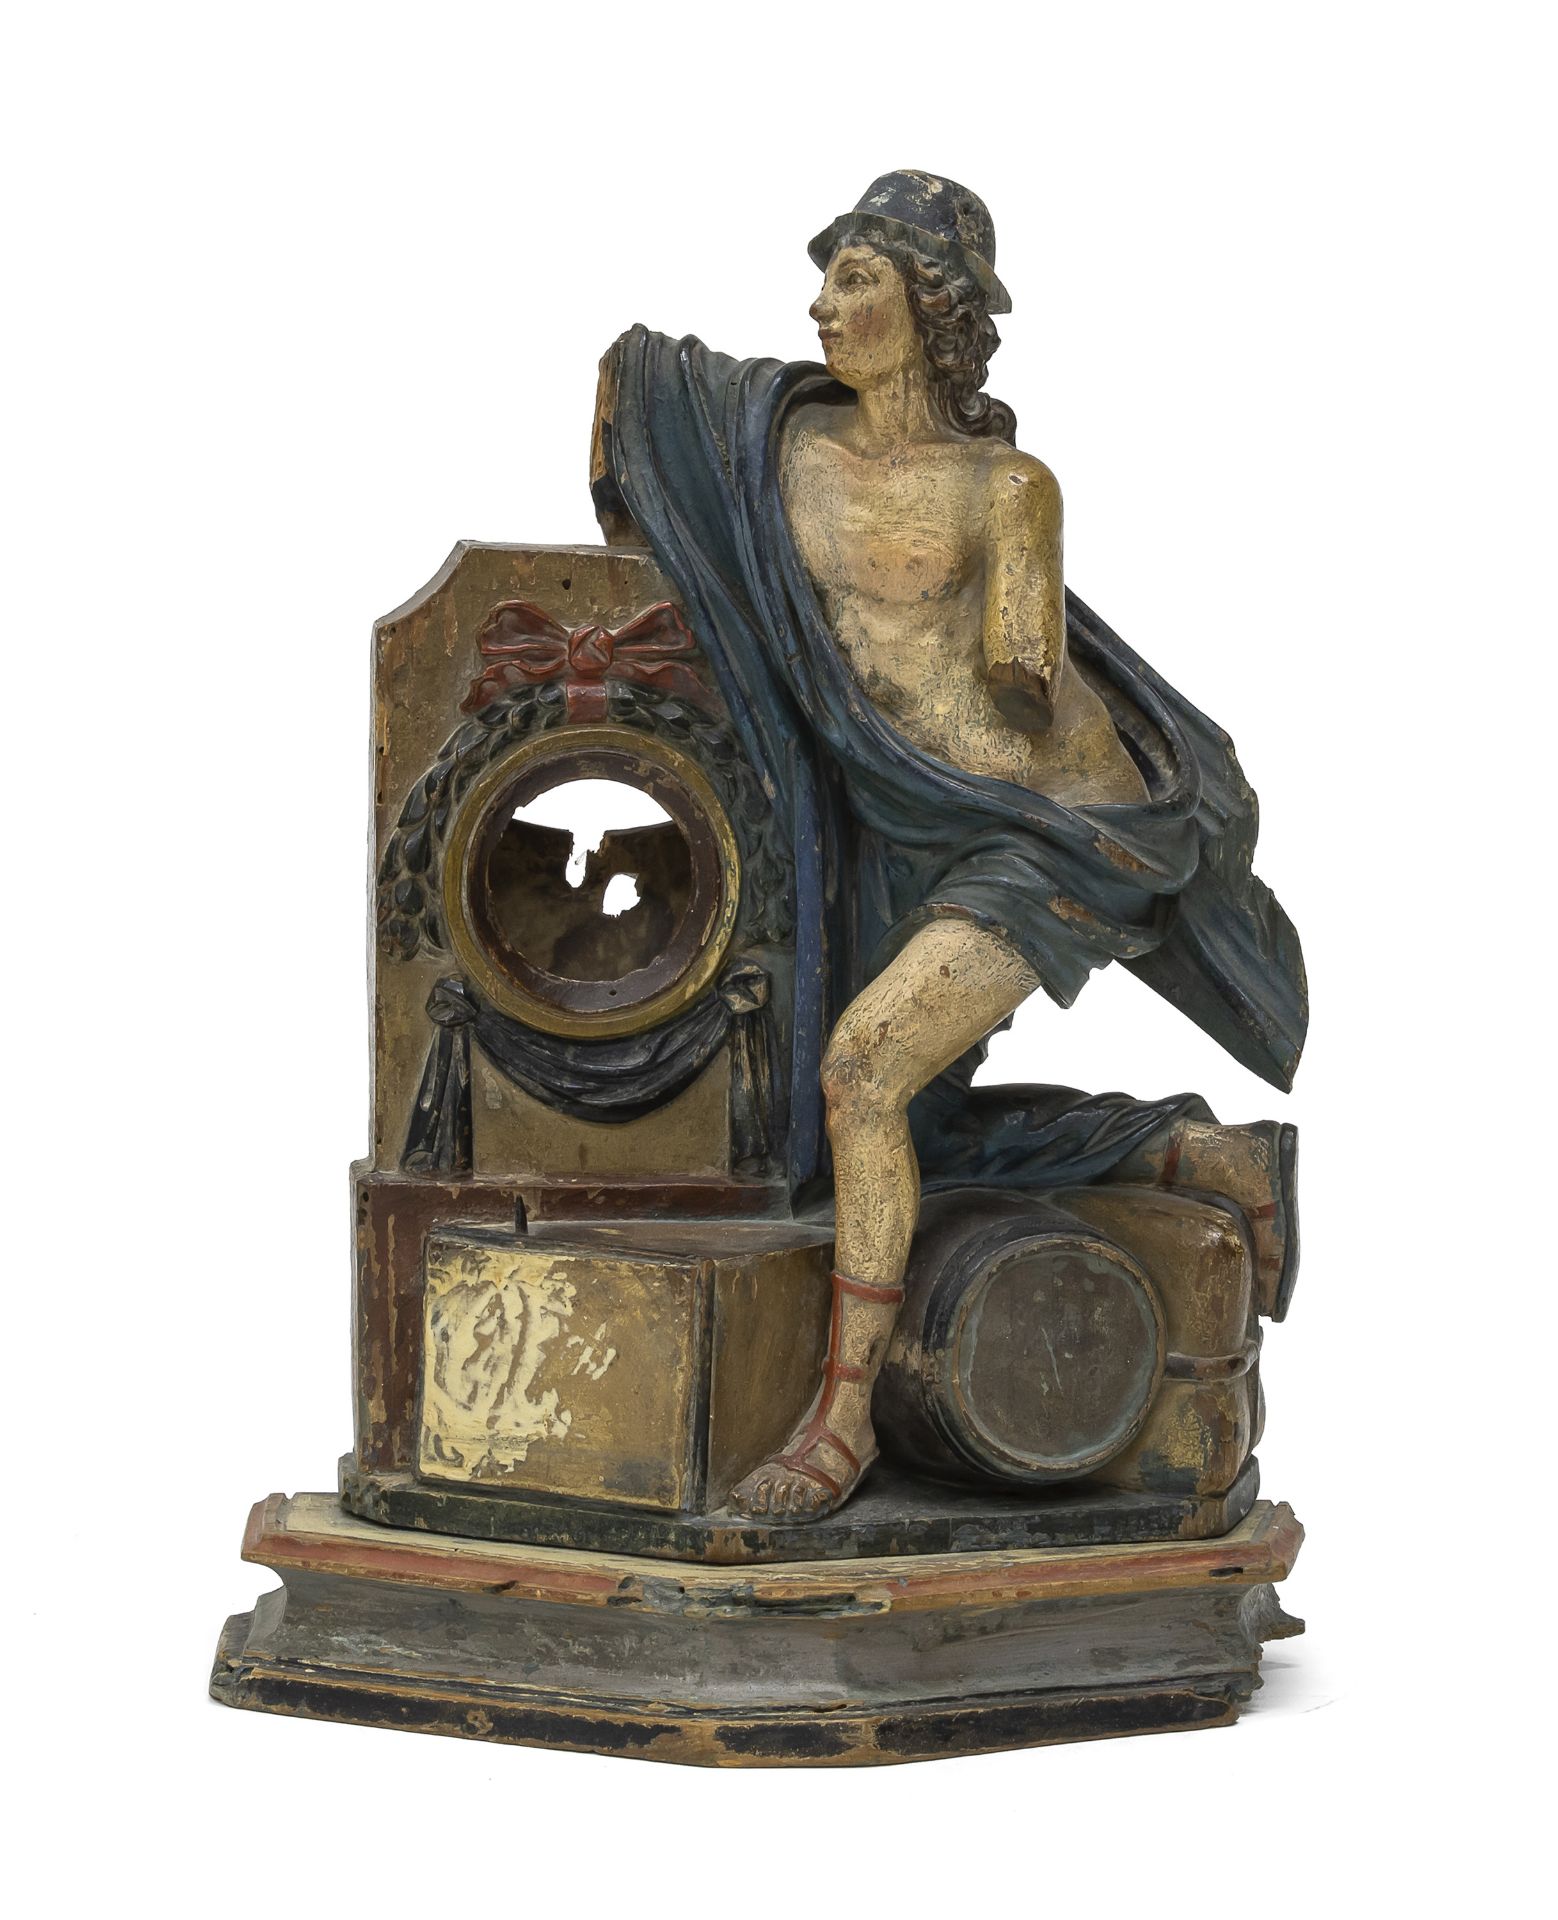 LACQUERED WOOD CLOCK CASE CENTRAL ITALY 18TH CENTURY